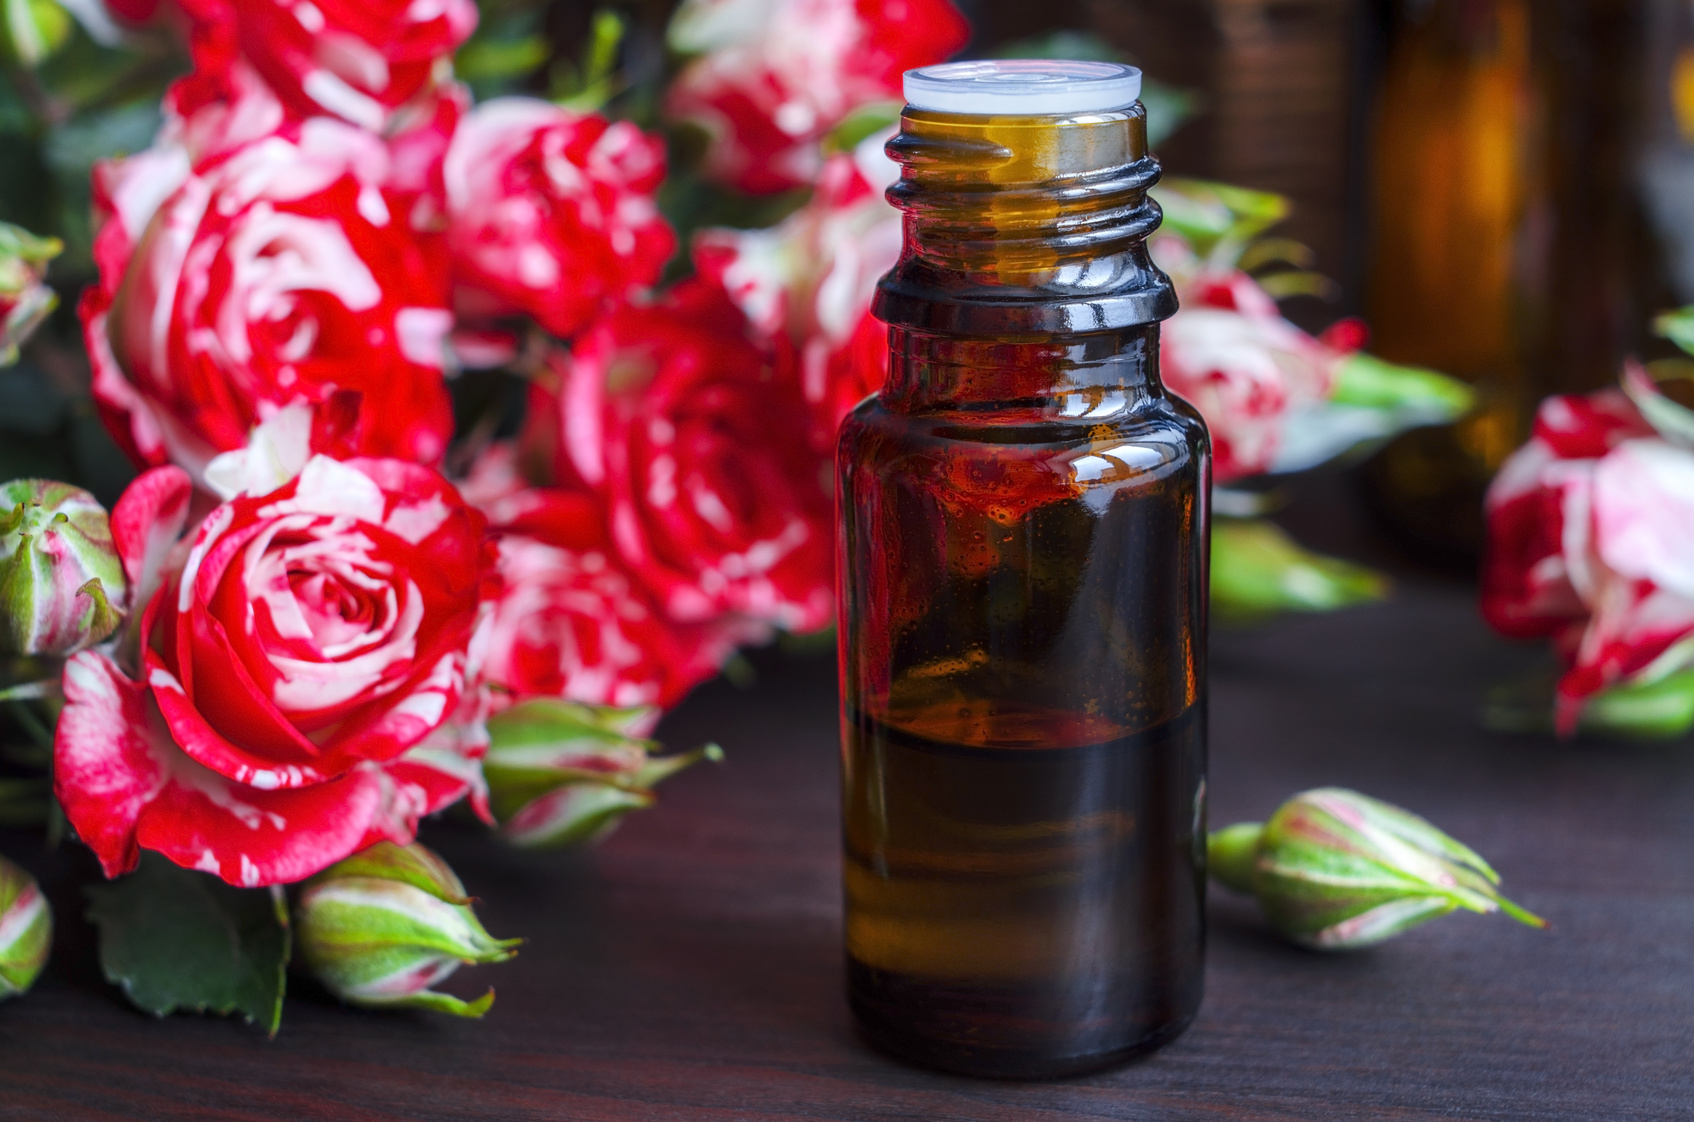 THE ESSENTIAL OIL YOU MUST HAVE FOR YOUR SKIN!